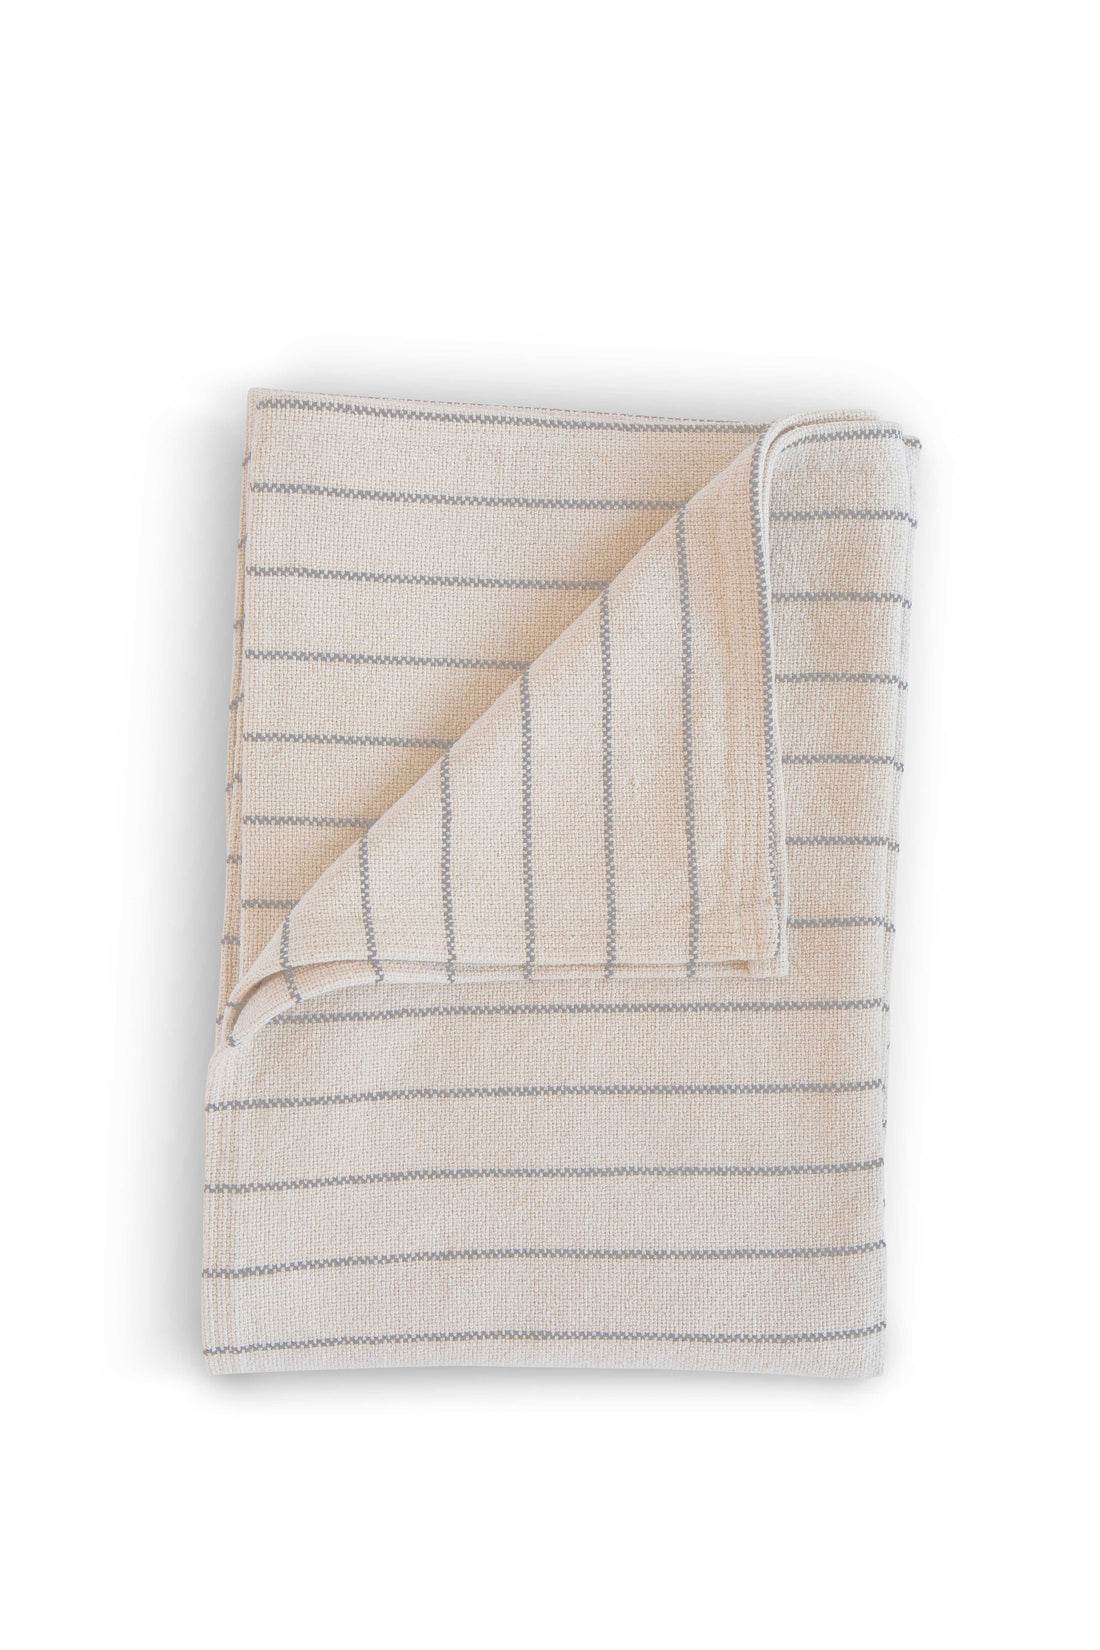 Folded 100% cotton pinstripe throw. Evangeline Linens best cotton blankets. Cream with classic grey color pinstripes.